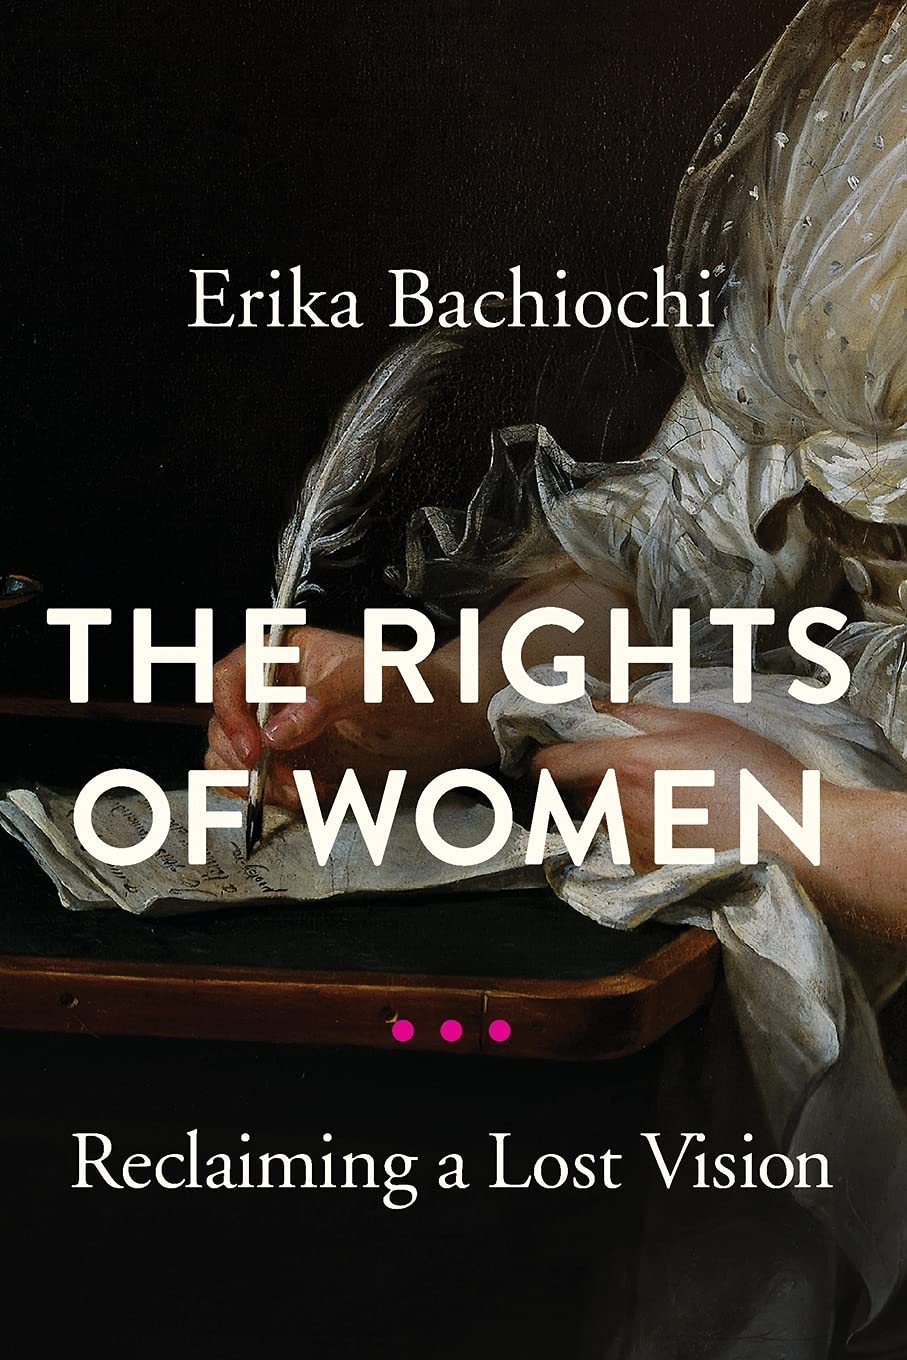 The Rights of Women: Reclaiming a Lost Vision (Book Review)